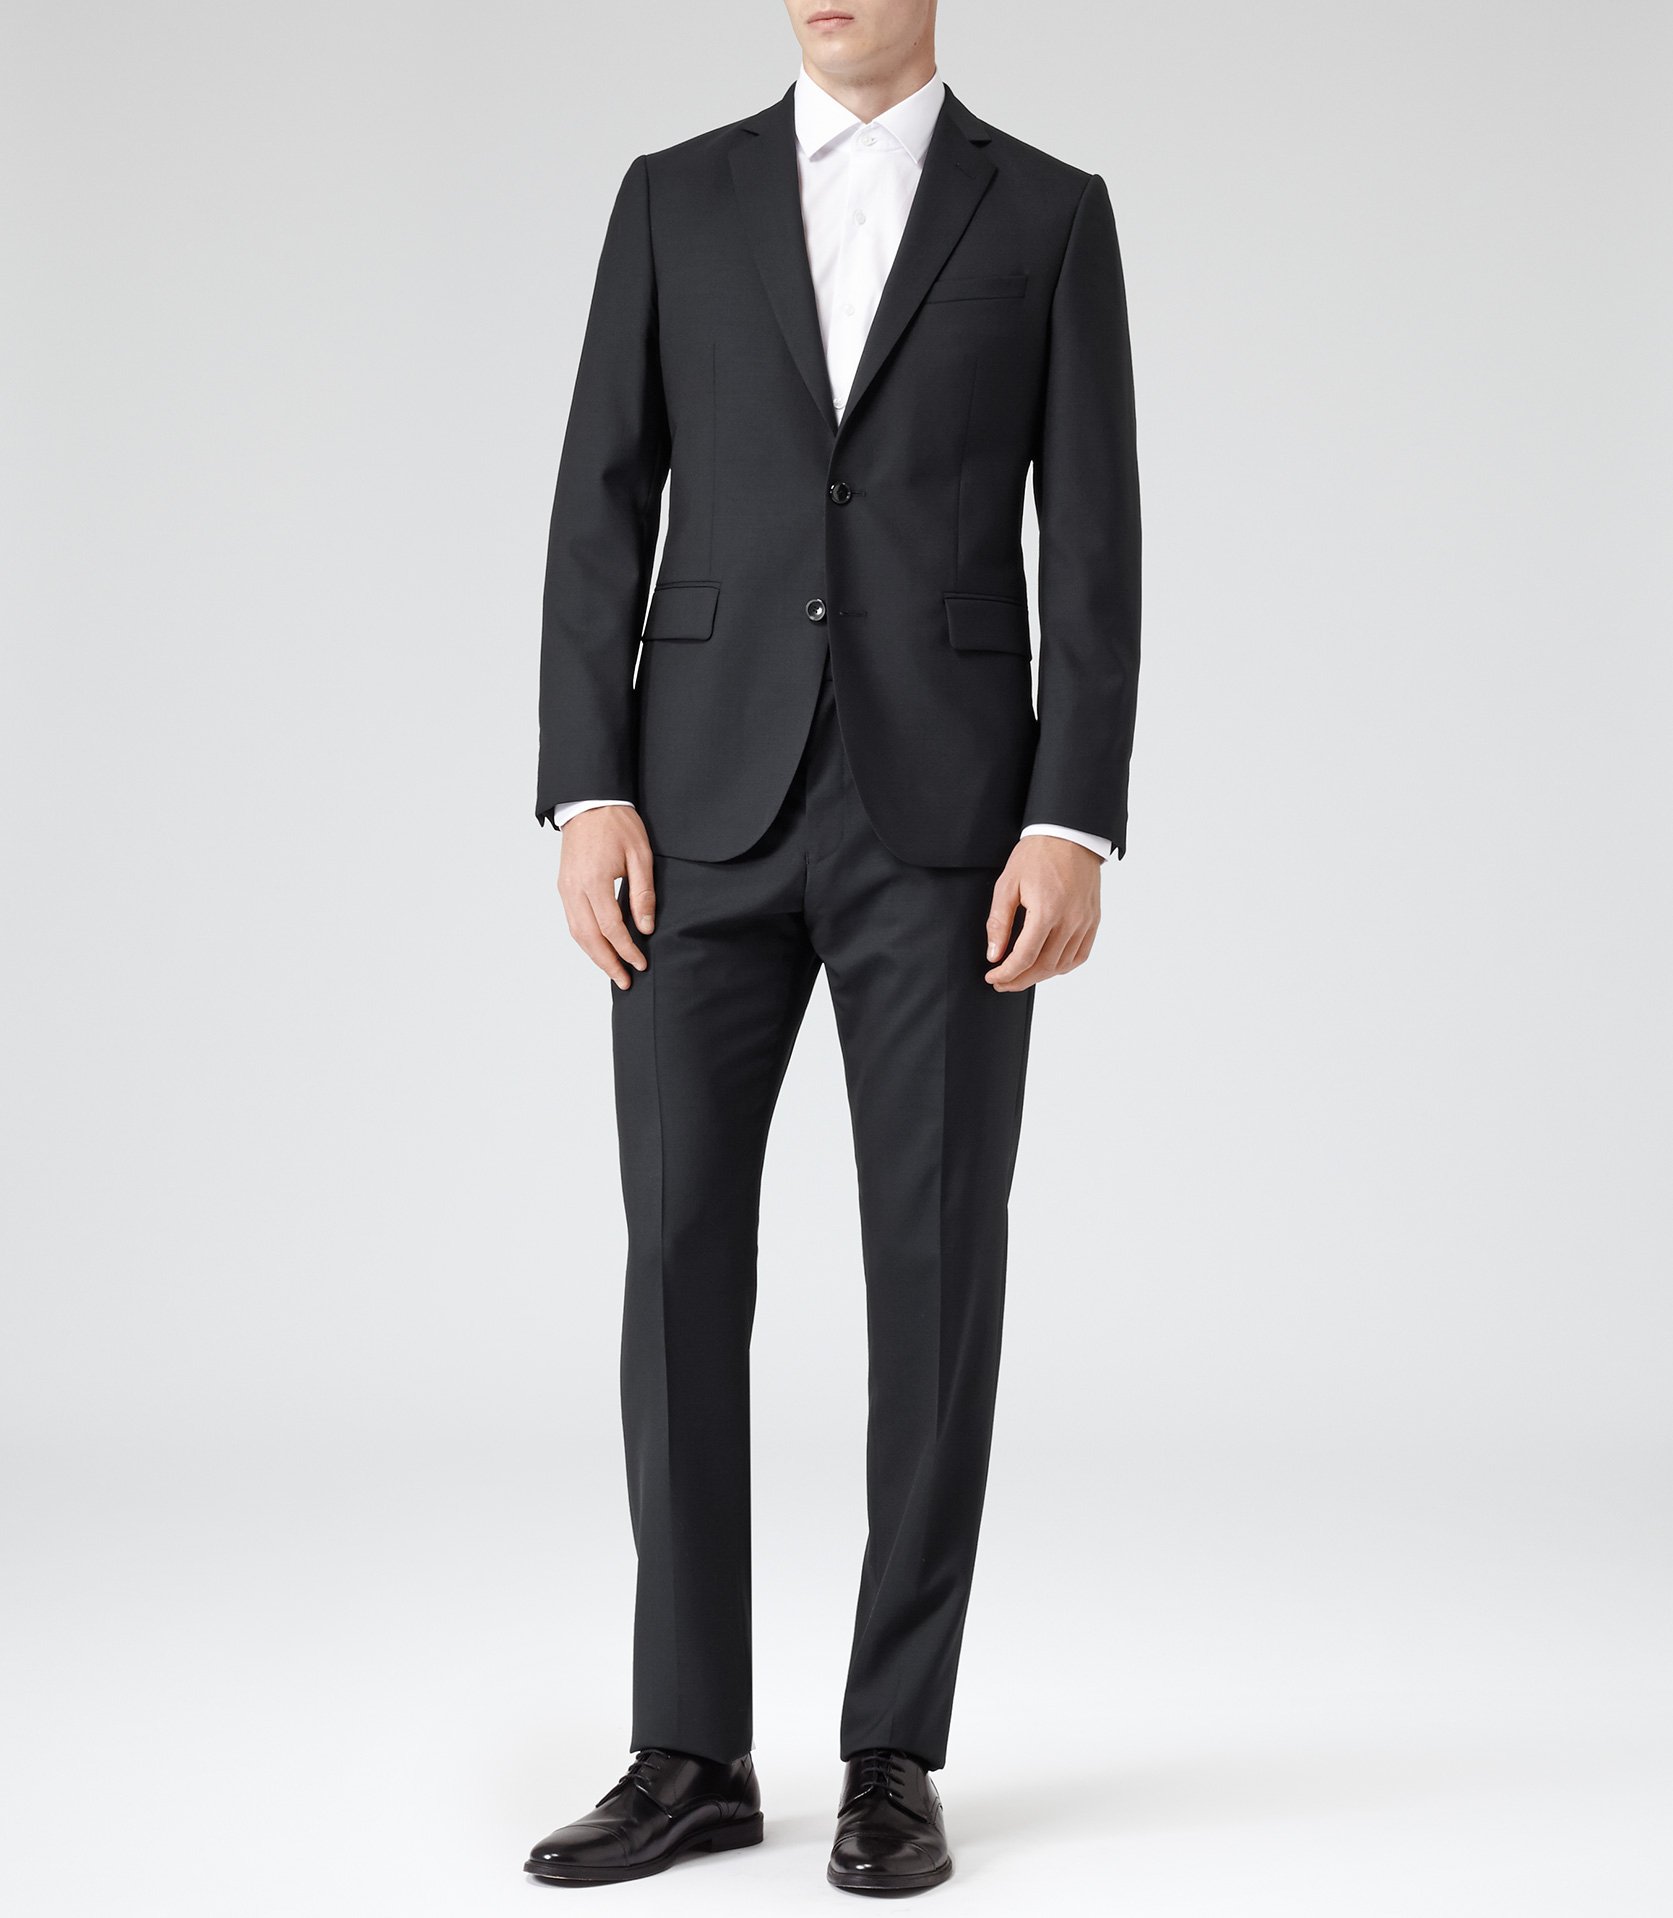 Lyst - Reiss Jamie Fine Check Suit in Blue for Men